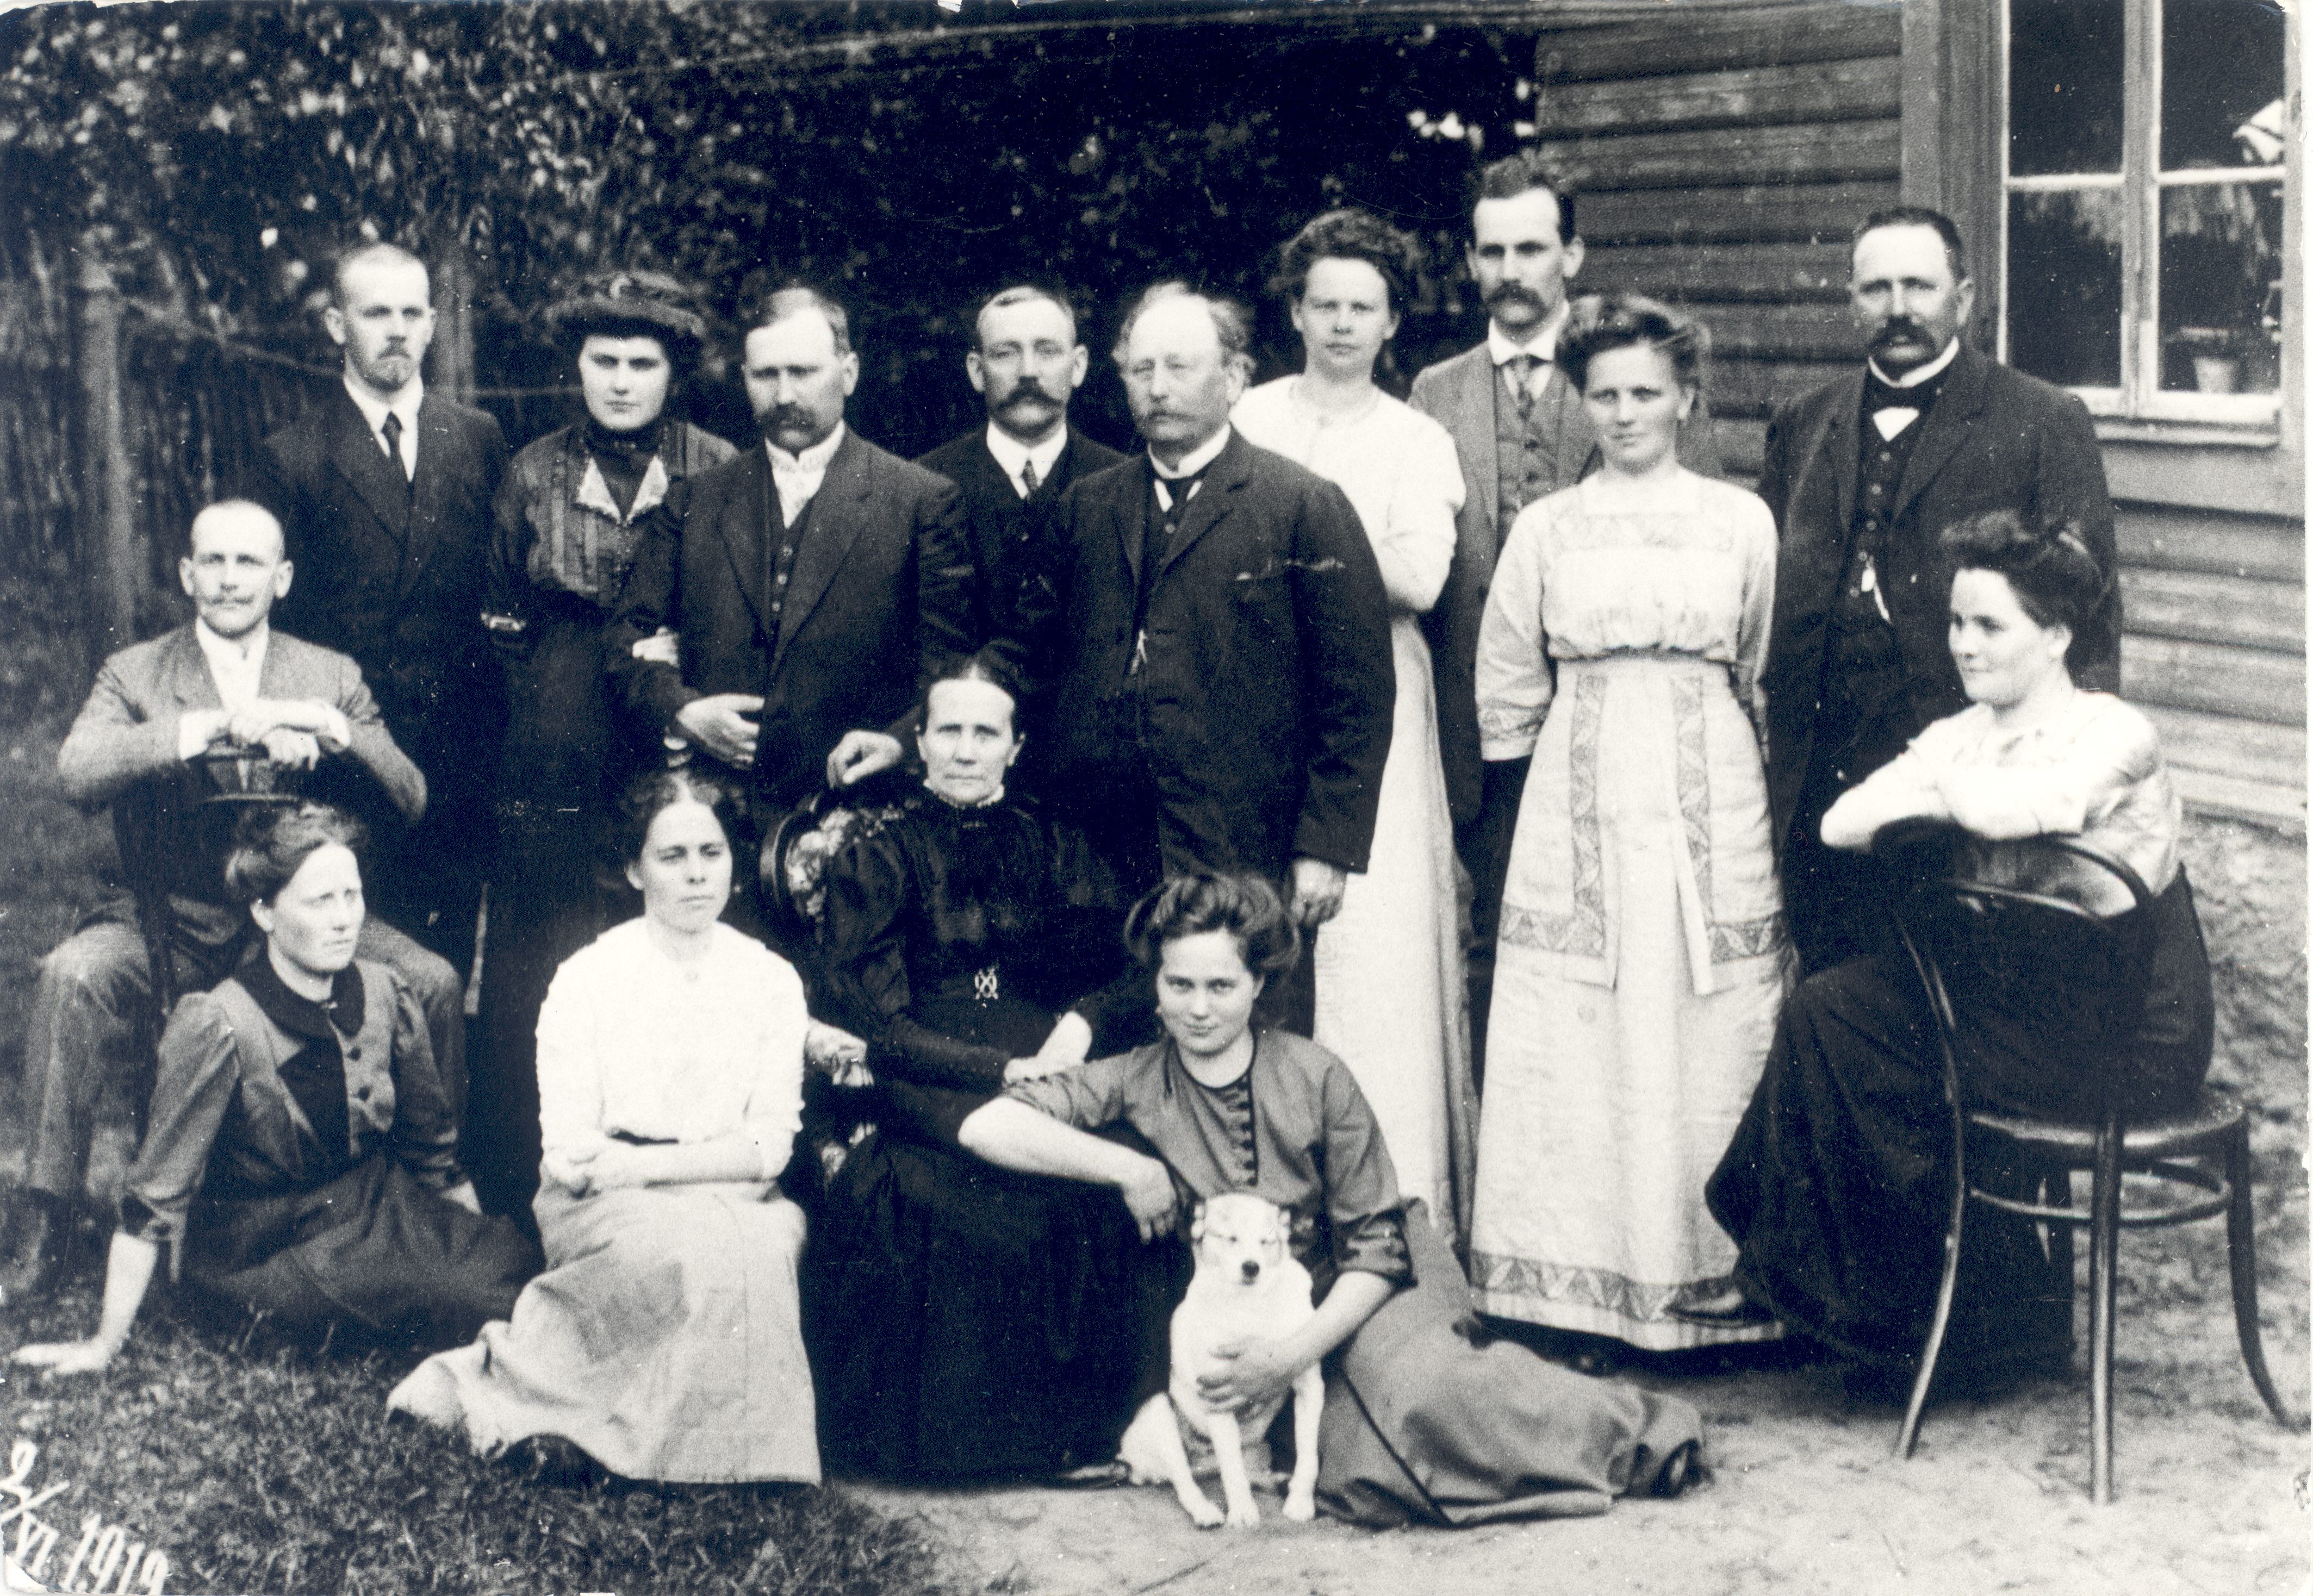 Break school manager's family approx. 1912. (in midst) Head of School Peeter Põld, in the middle of his wife Julie, behind the right minia Helmi, son Peeter, daughter Anna, her husband a. Malvet (Mahlstein), sitting on the right daughter Helene-Emilie, left sitting behind the daughter Marta, daughter Hedvig, daughter Margarete with her mother on the right ( ) sits Engelhart, stands son Reinhold, minia Selma, son Harald, son Alexander